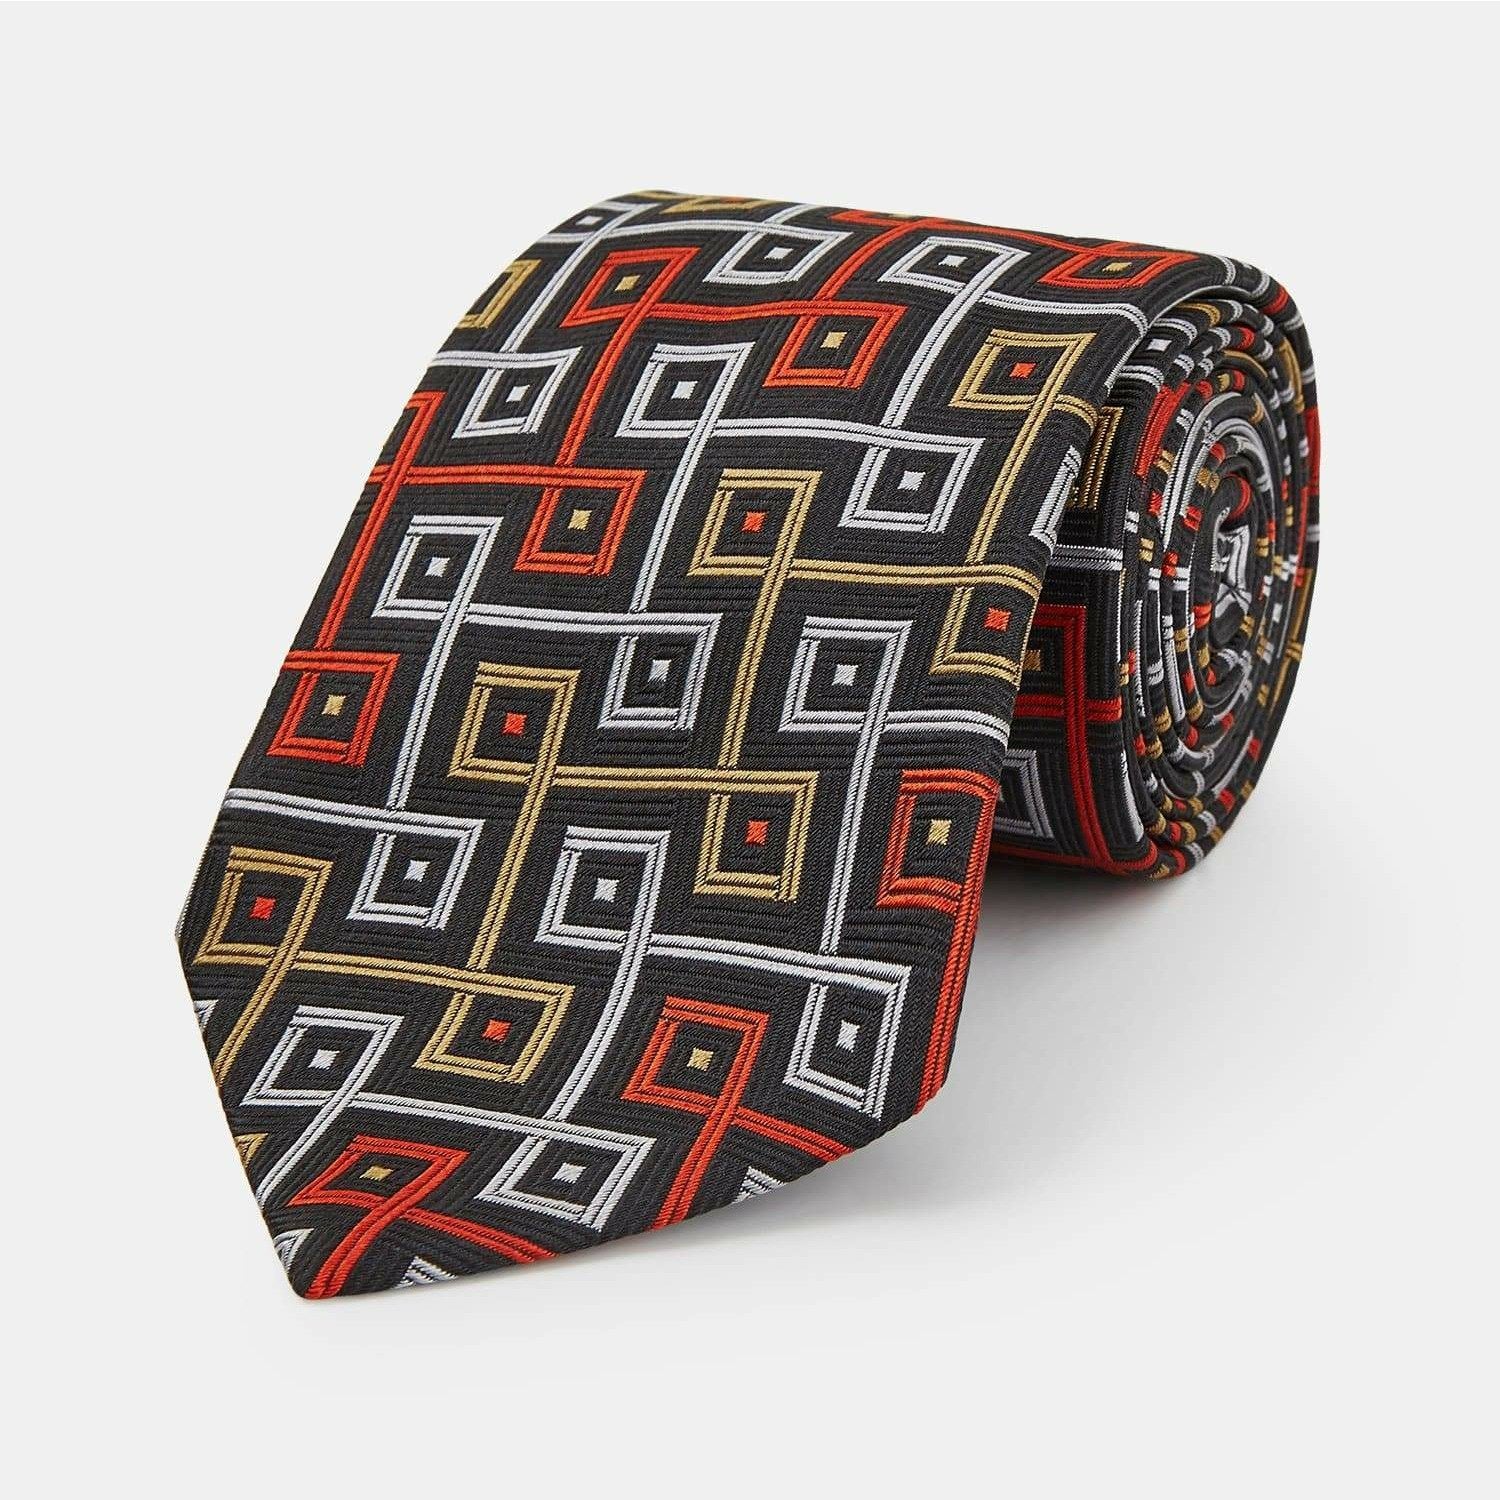 Silk Tie By Turnbull & Asser - The World Is Not Enough Edition - 007STORE